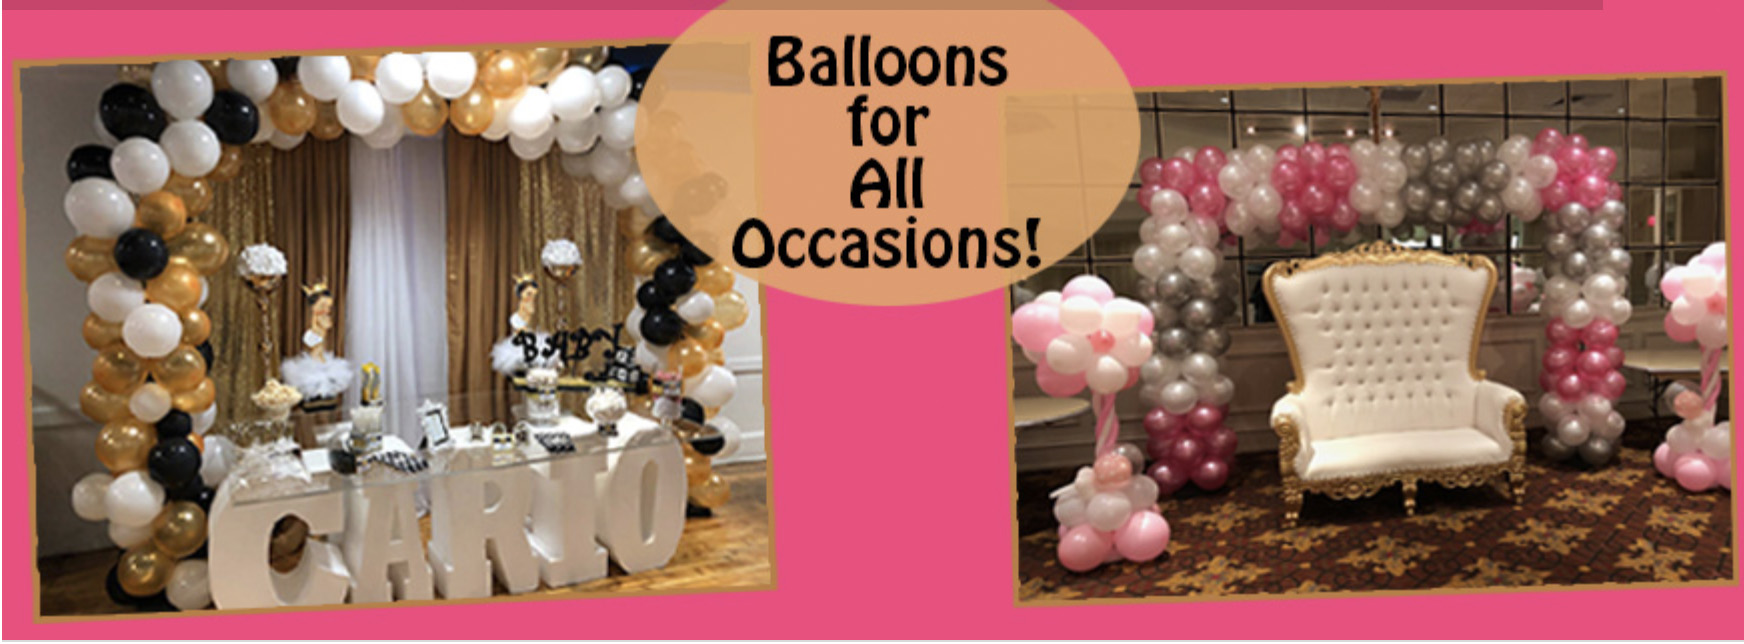 Balloons for All Occasions!